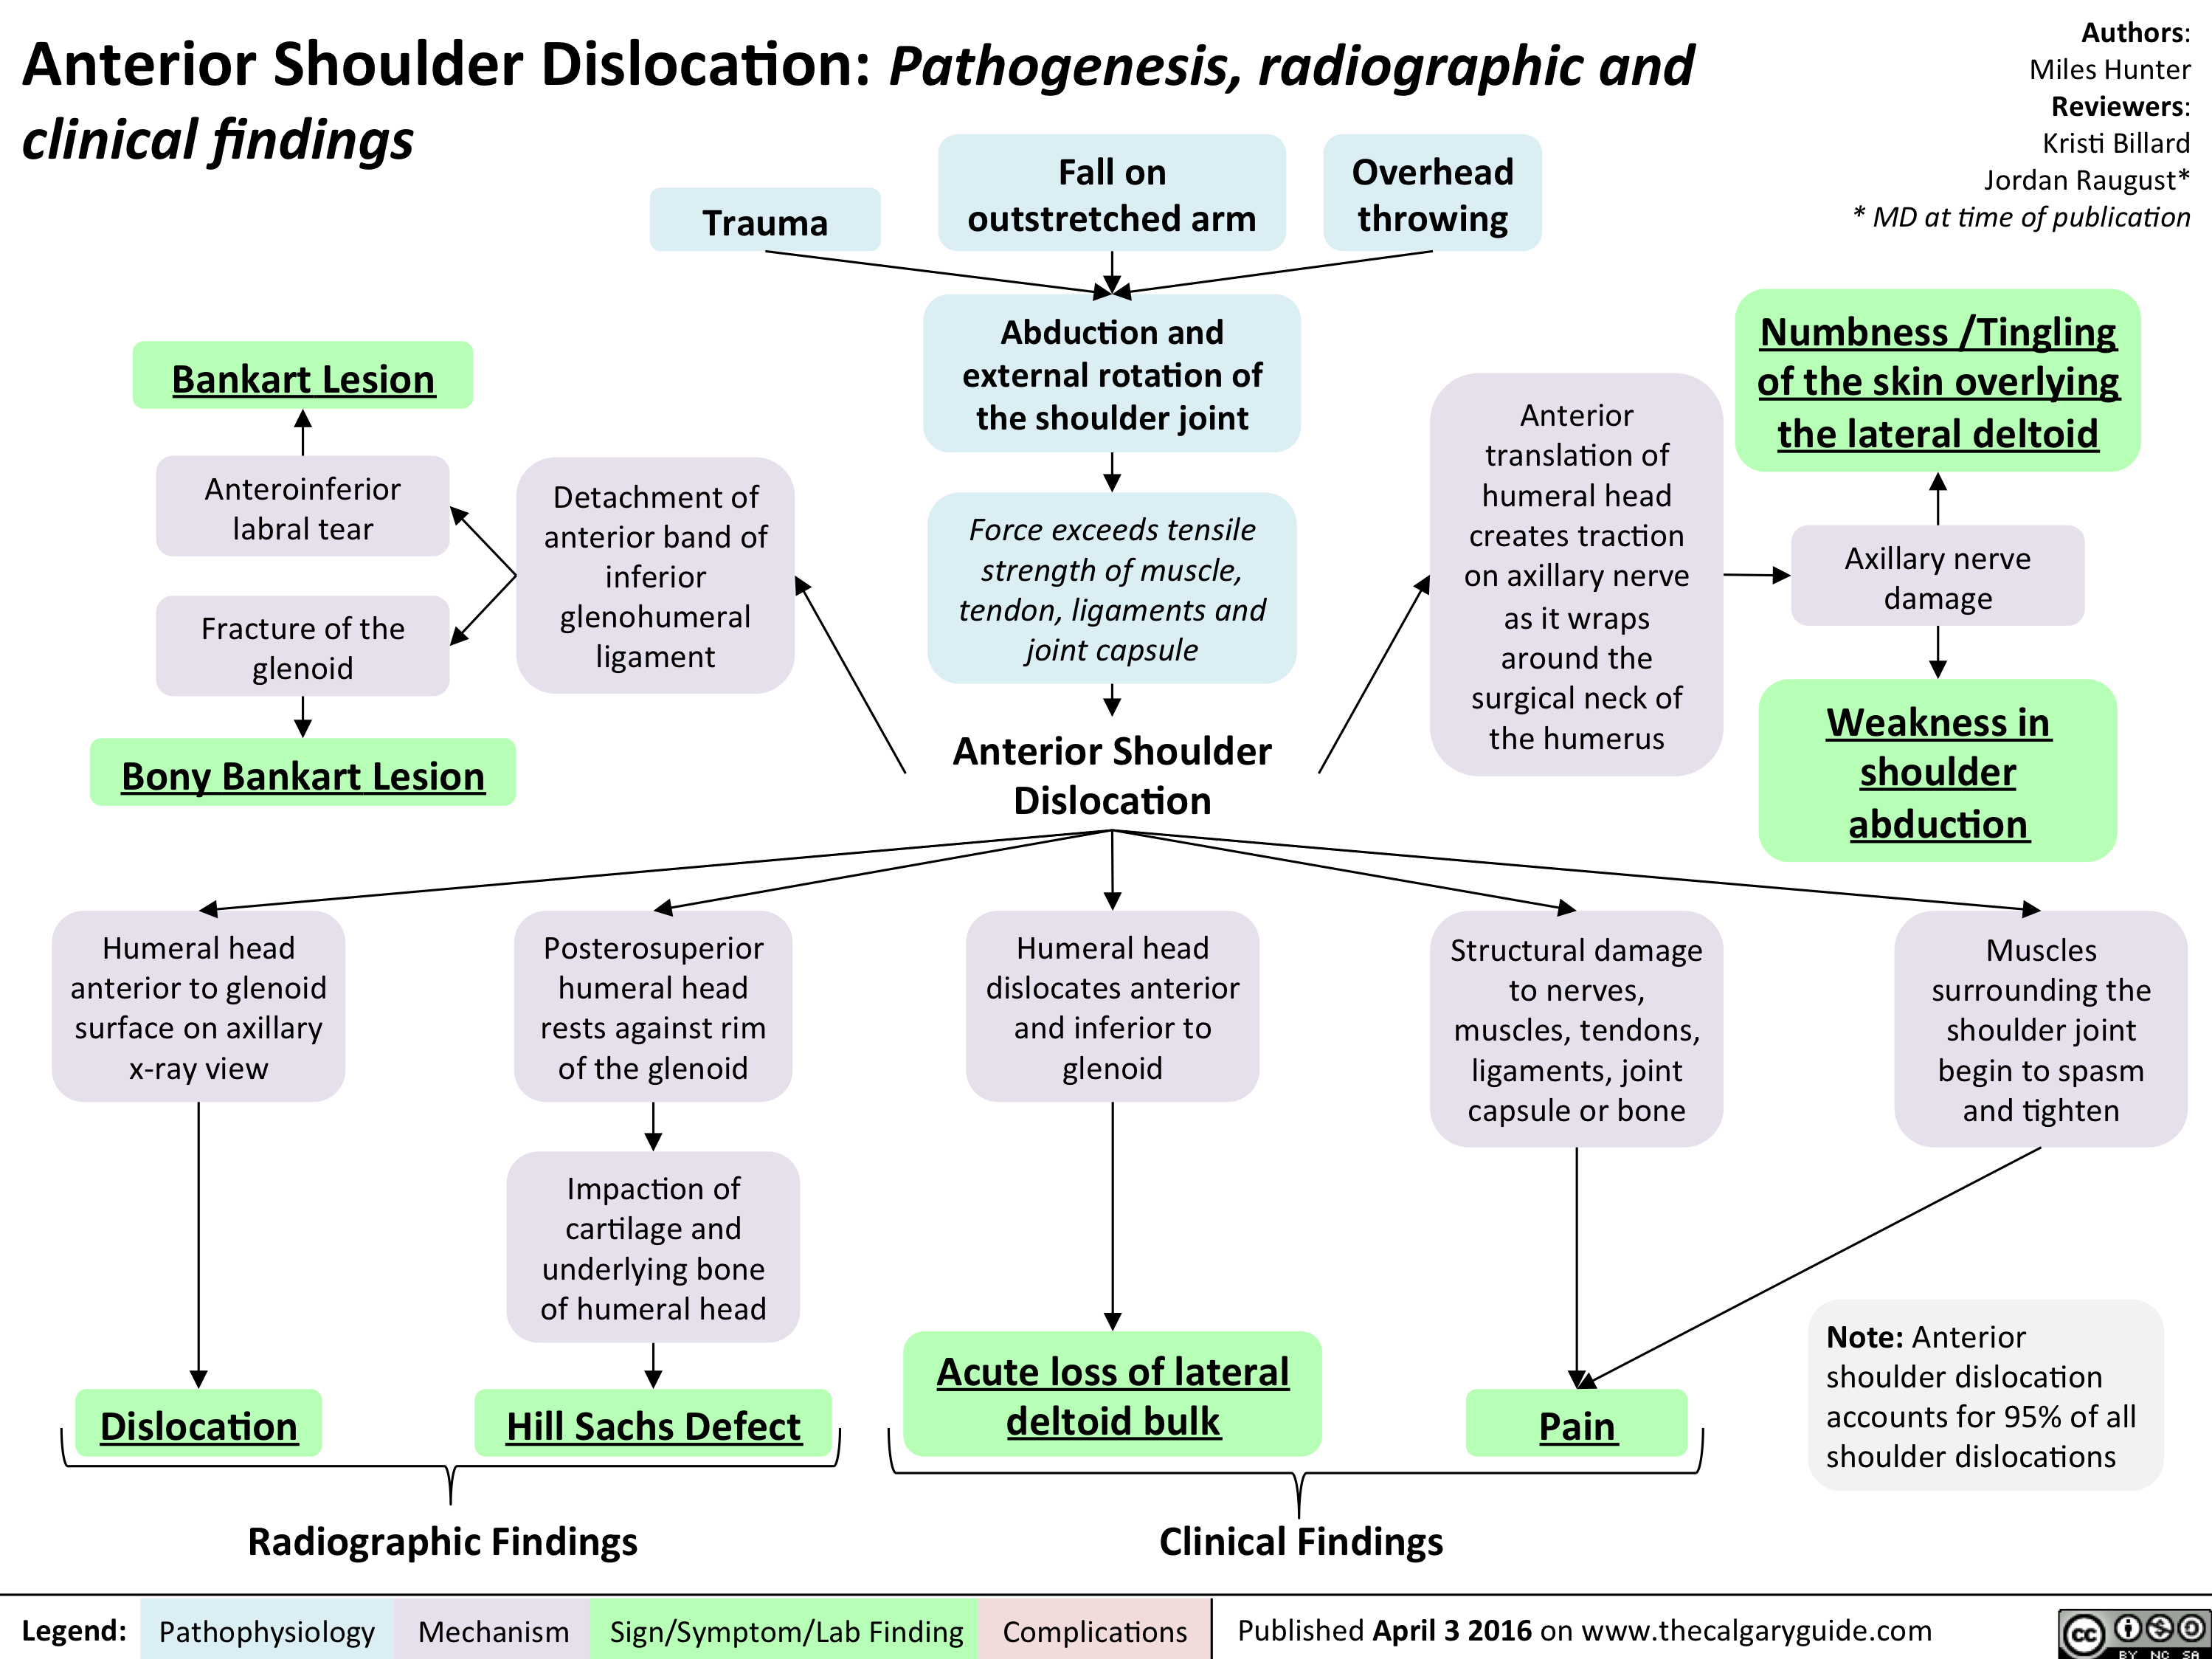 Anterior Shoulder Dislocation - Pathogensis clinical and radiographic findings